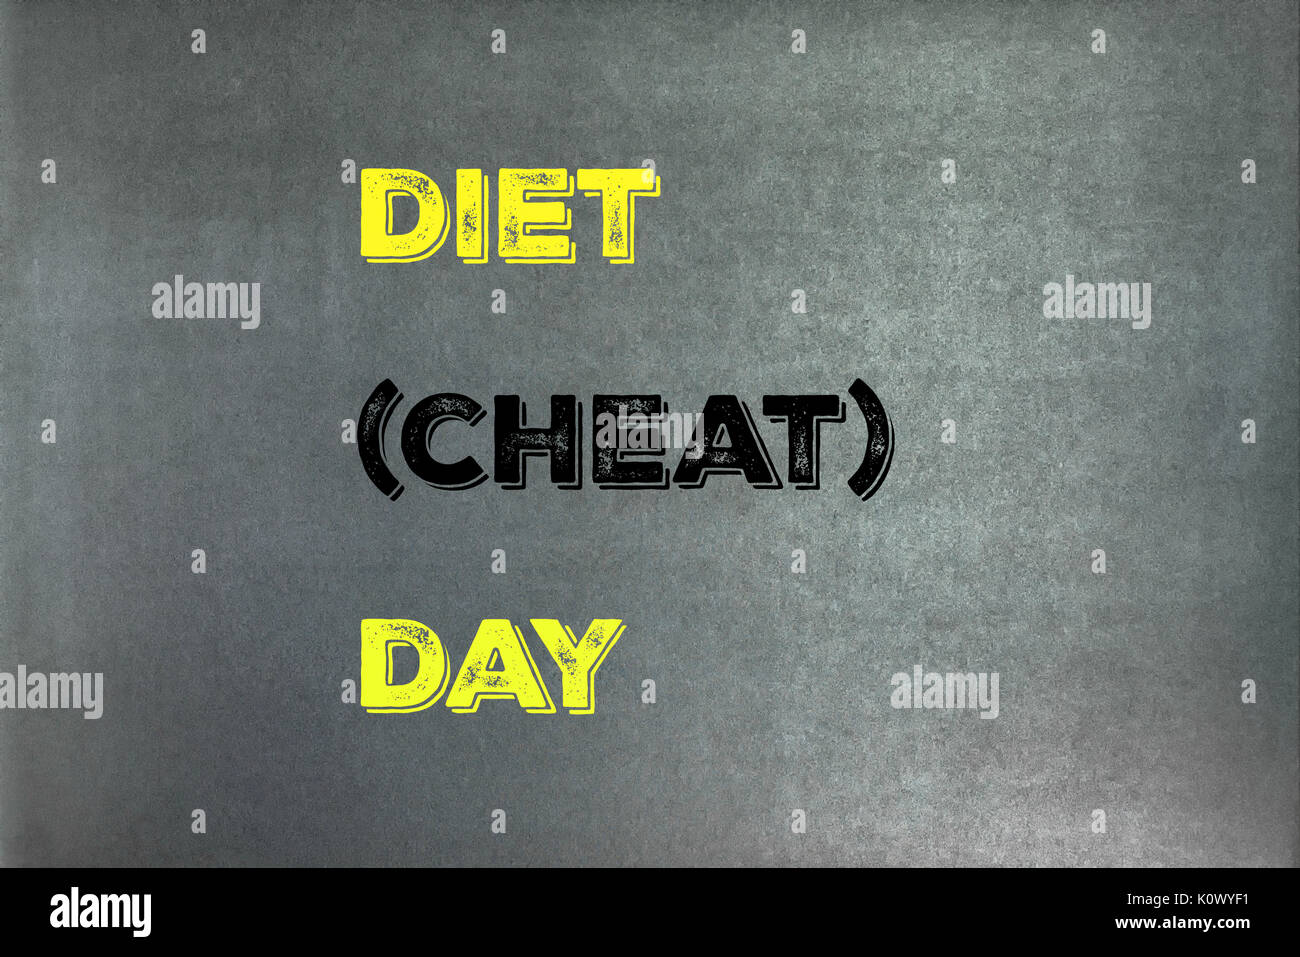 The phrase Diet Day placed onto a chalkboard texture background.  Graphic Design. Stock Photo